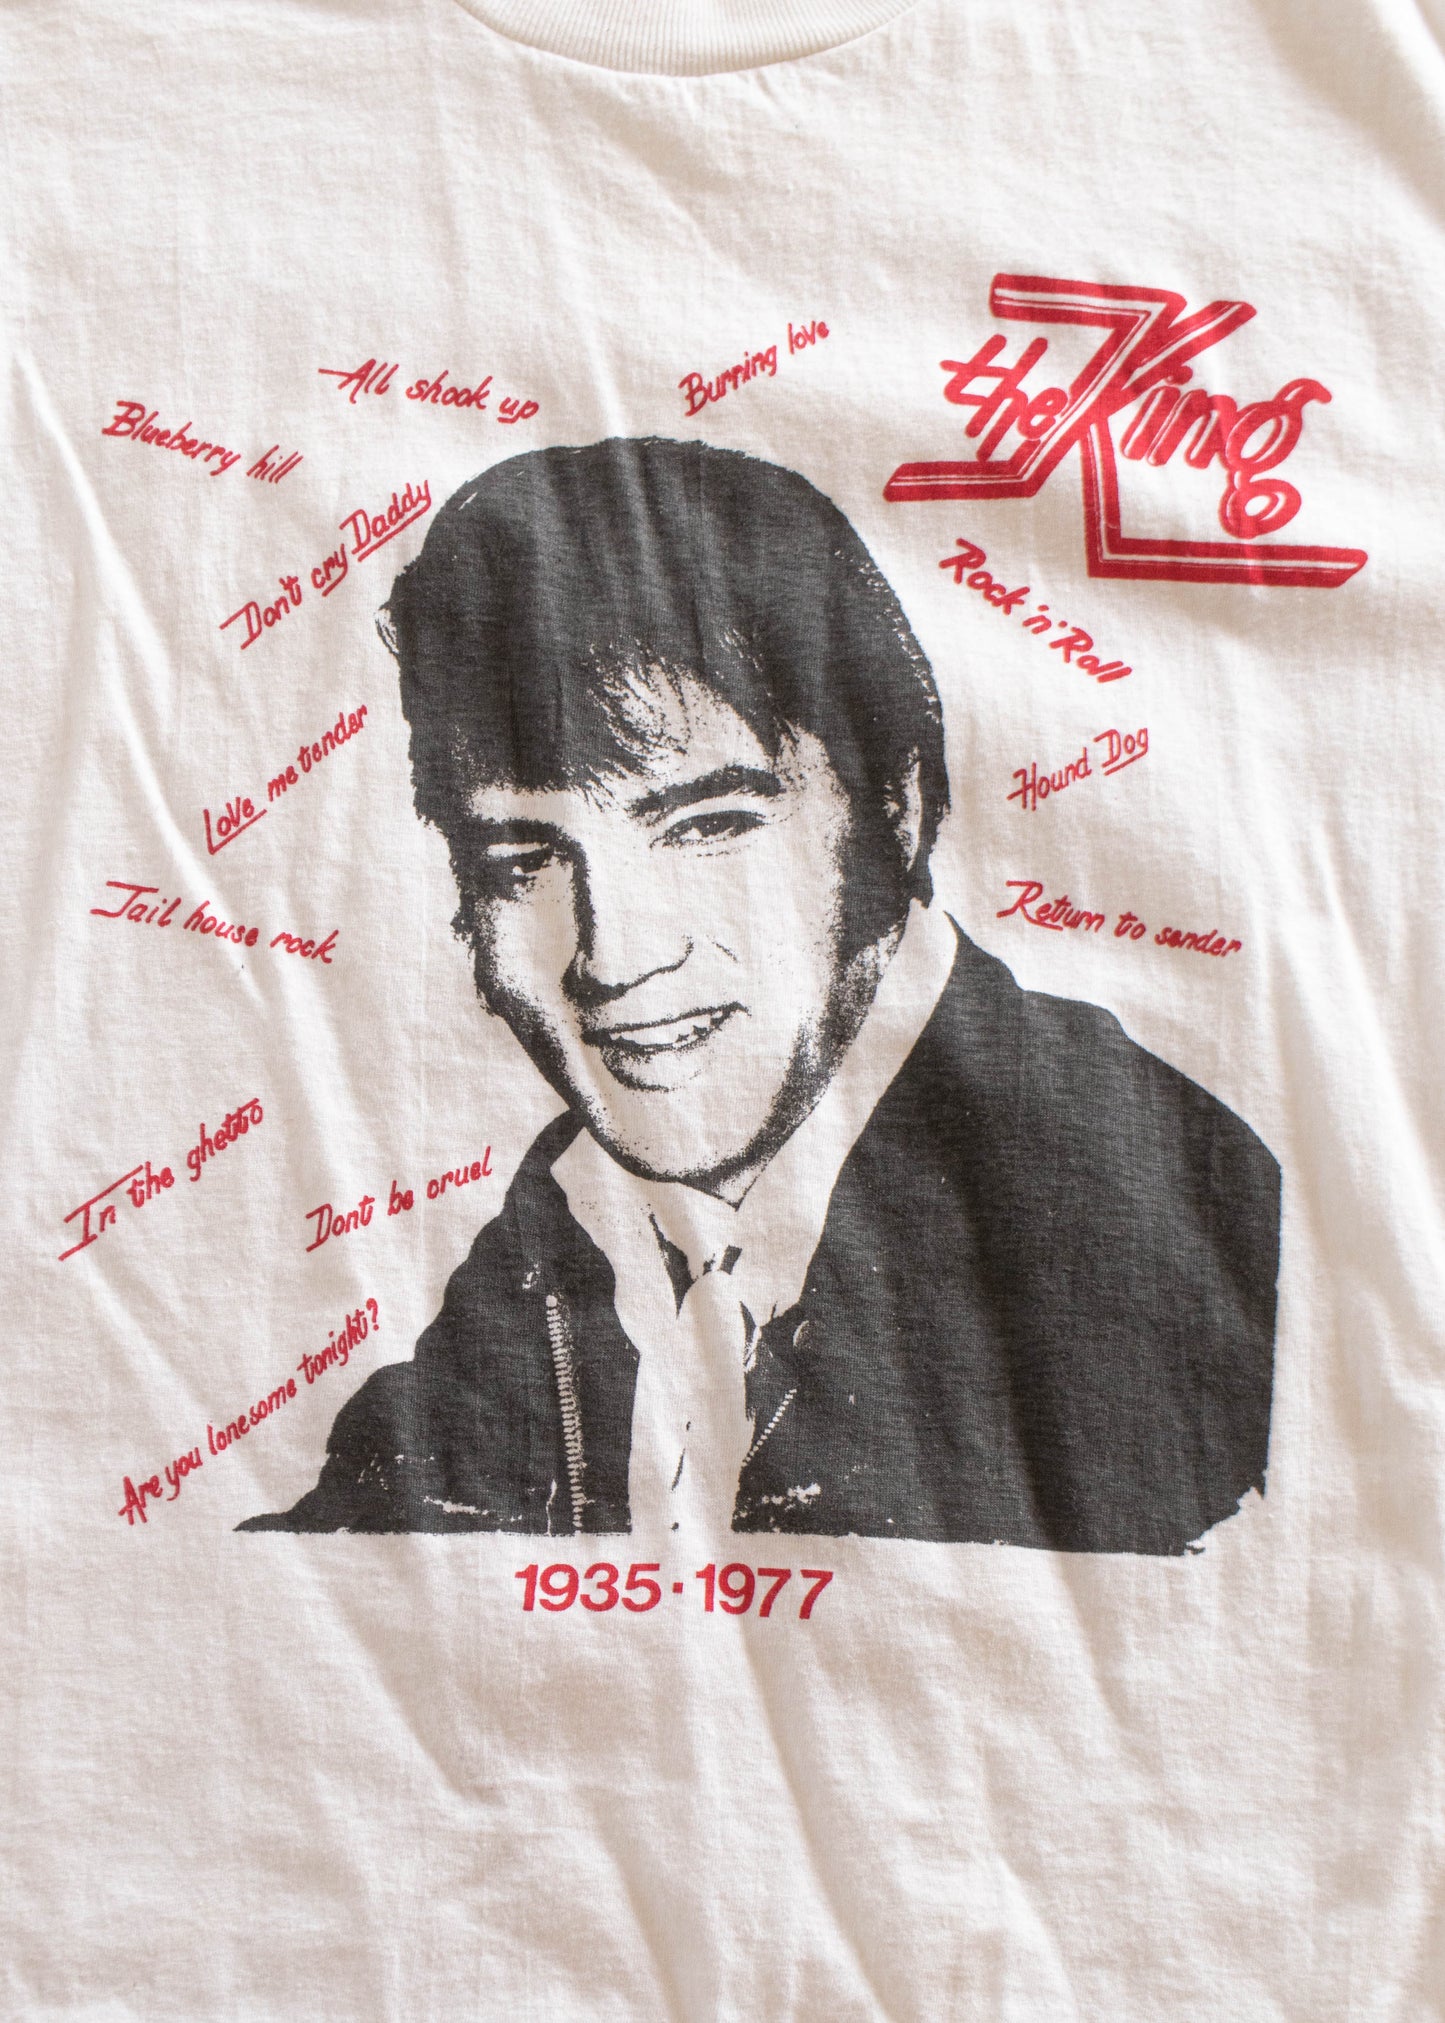 1970s Elvis "The King" T-Shirt Size XS/S